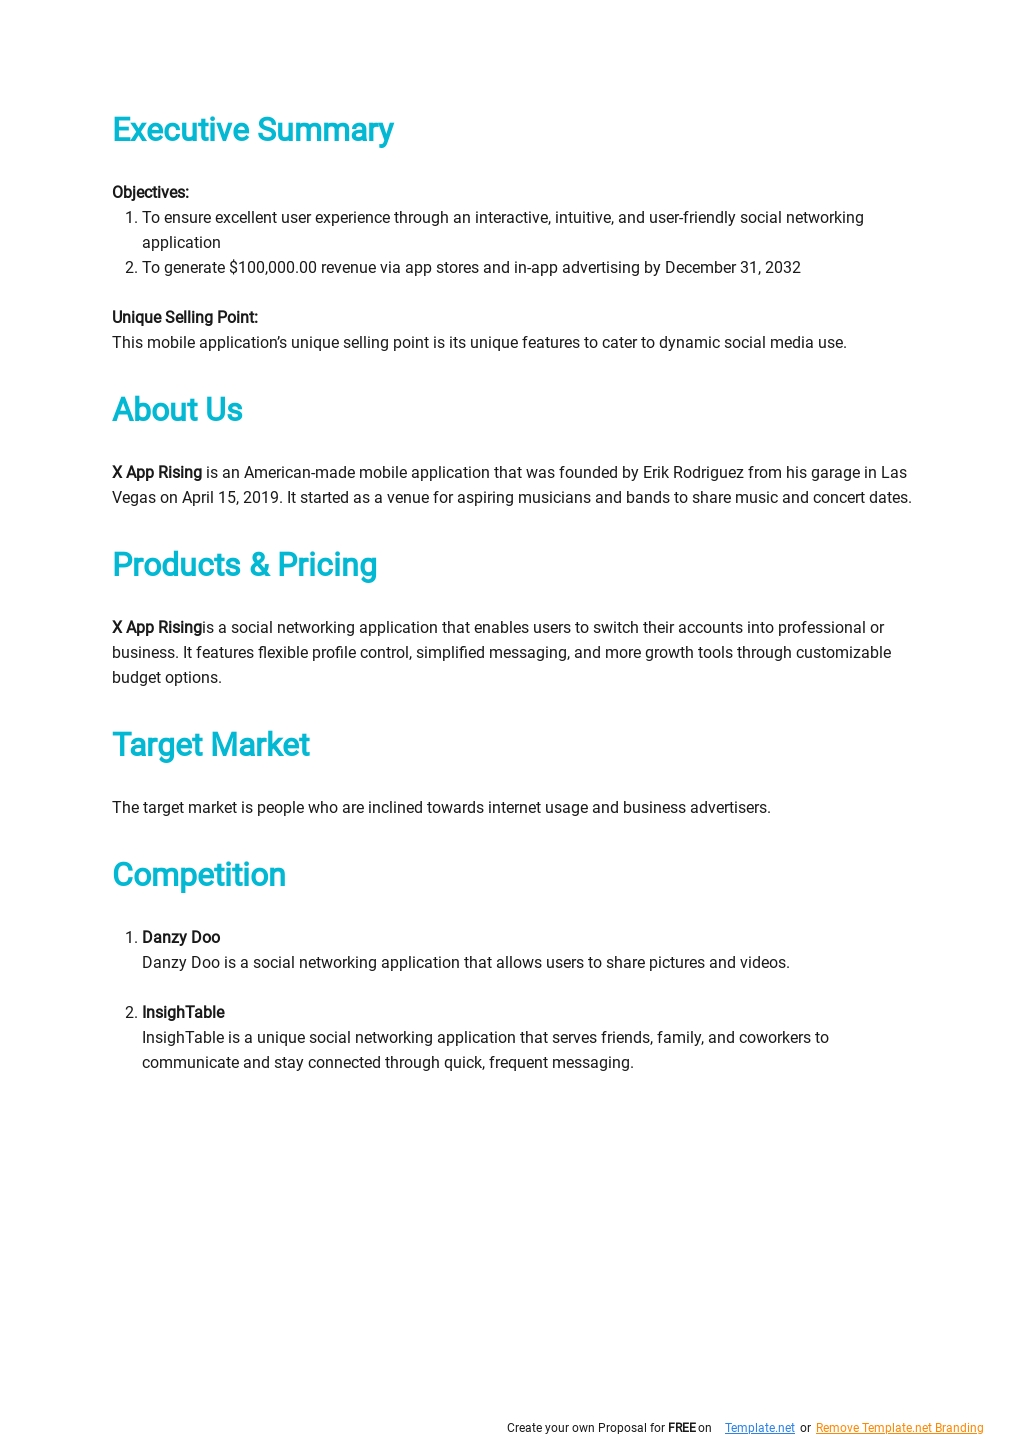 mobile-app-business-plan-template-google-docs-word-apple-pages